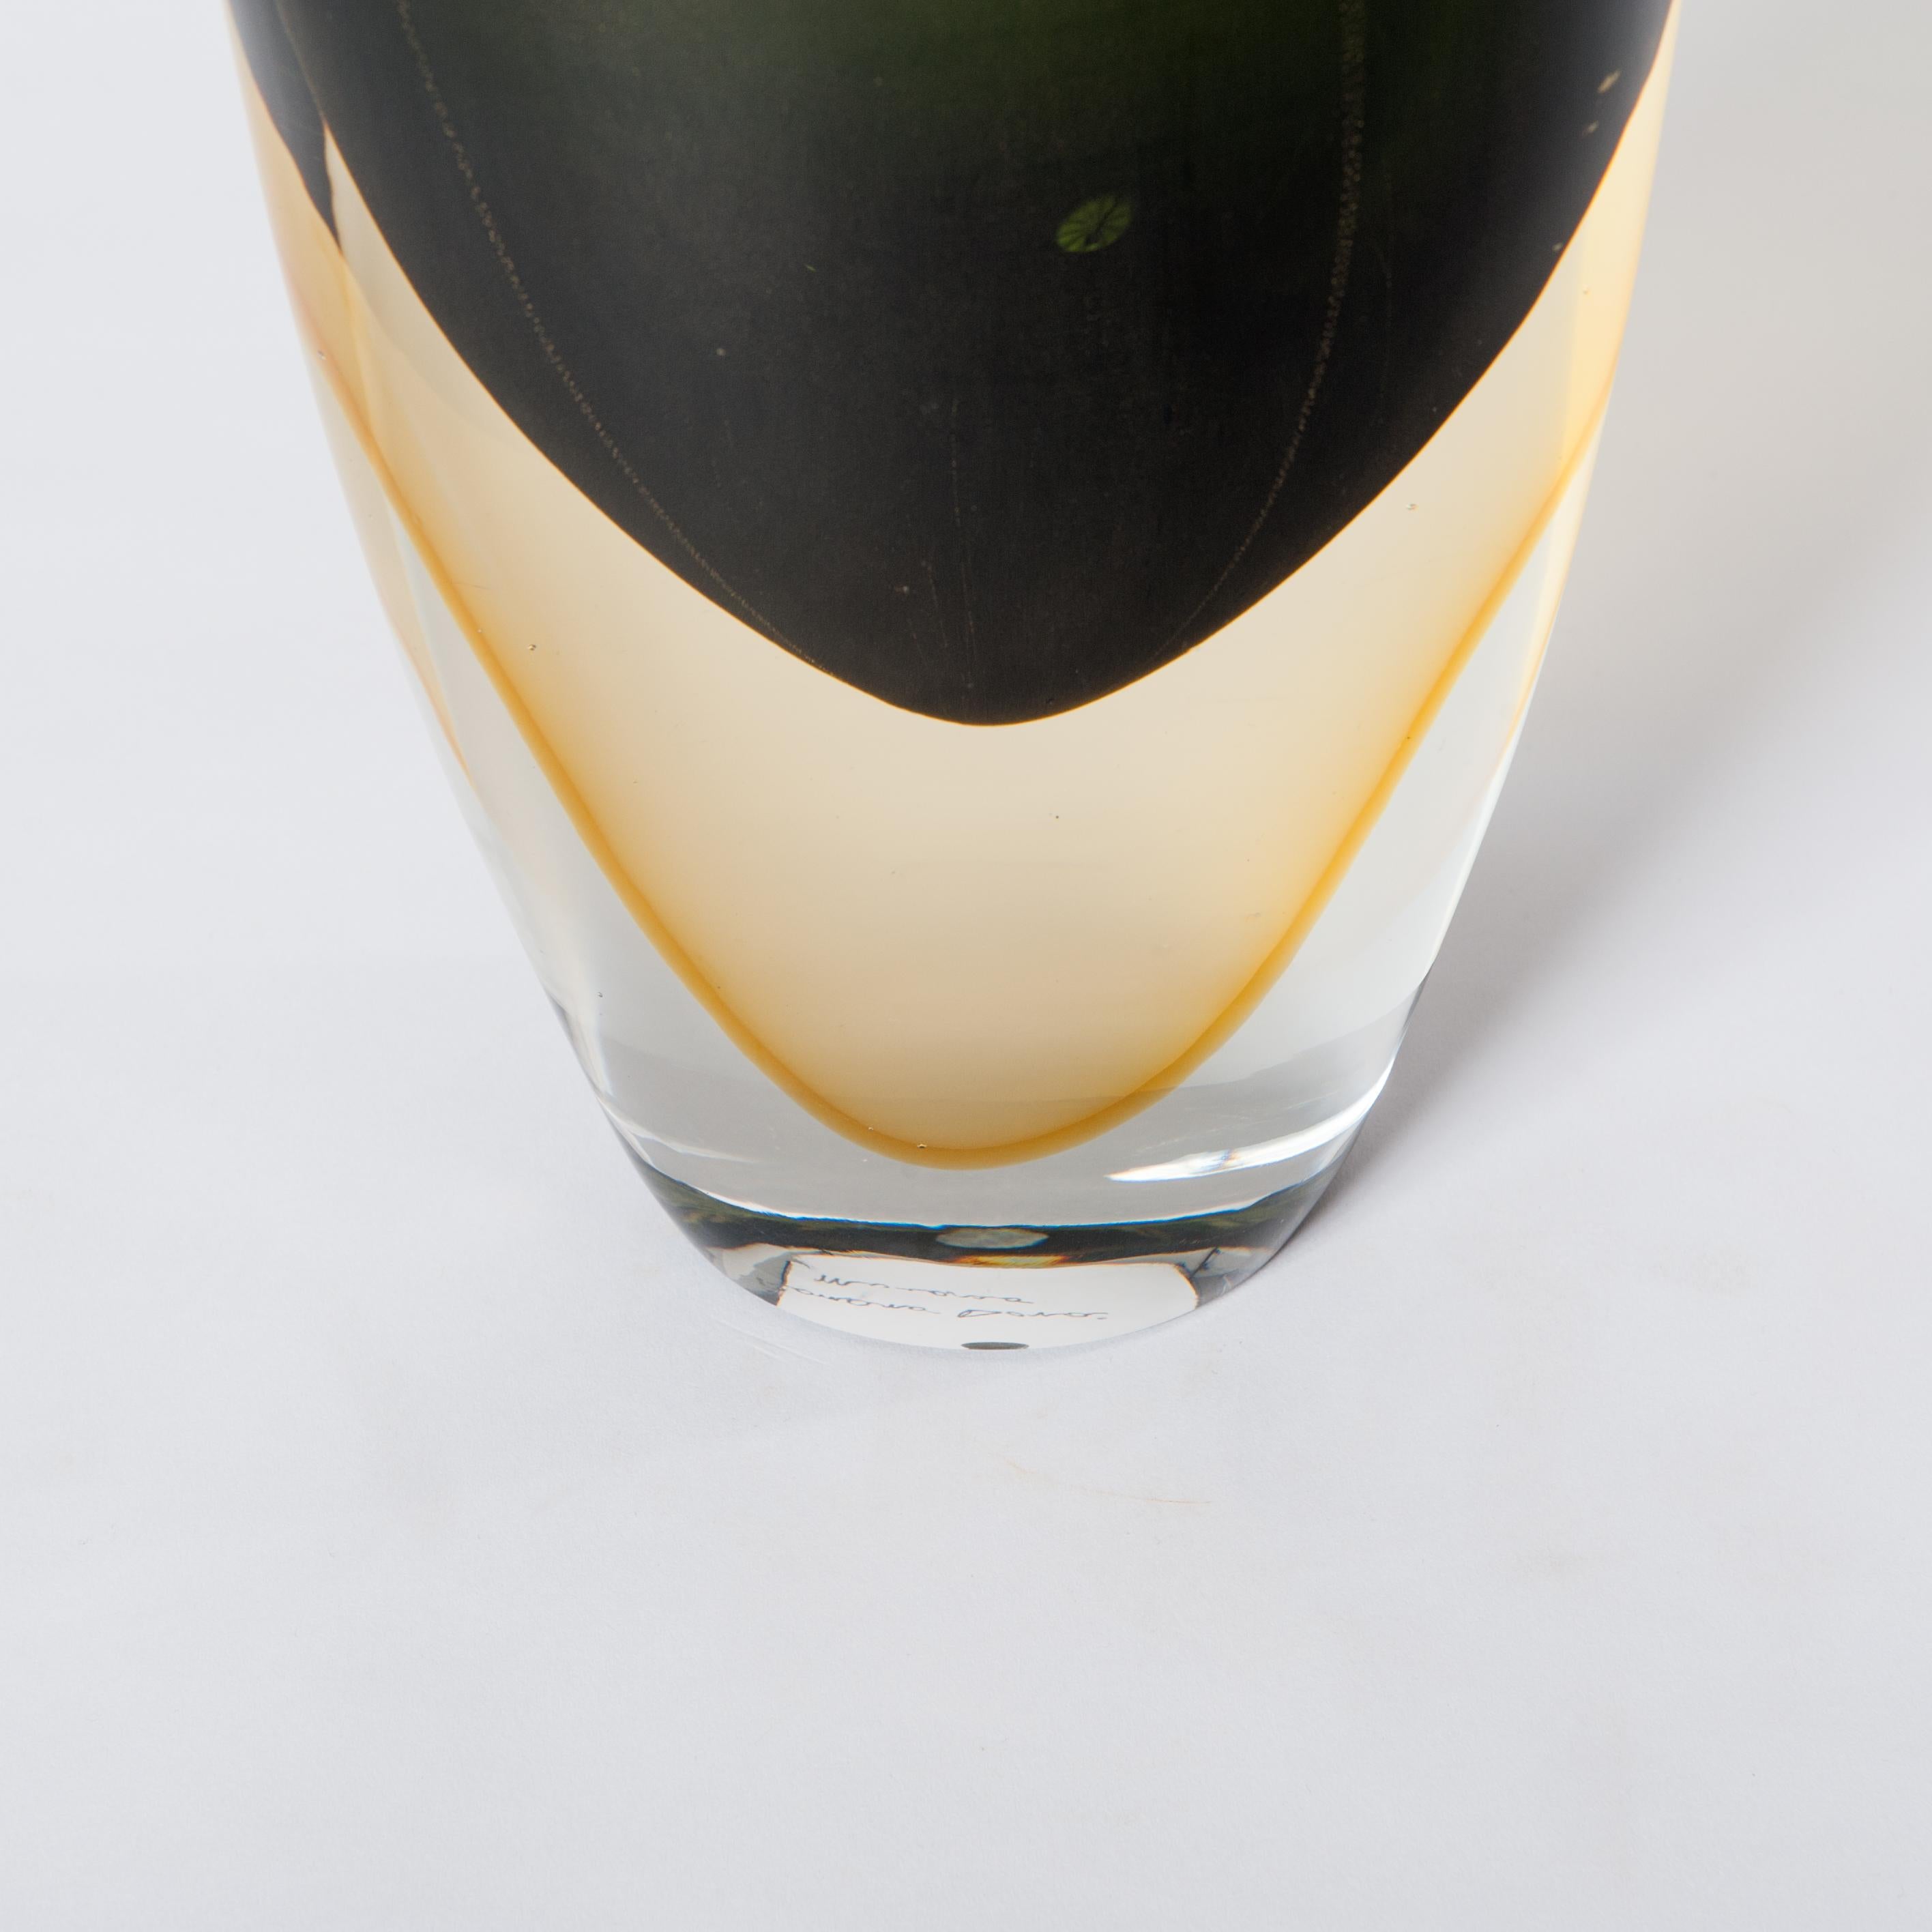 Italian Handmade Murano Glass Sommerso Vase in Darkgreen, Yellow Signed by Romano Donà For Sale